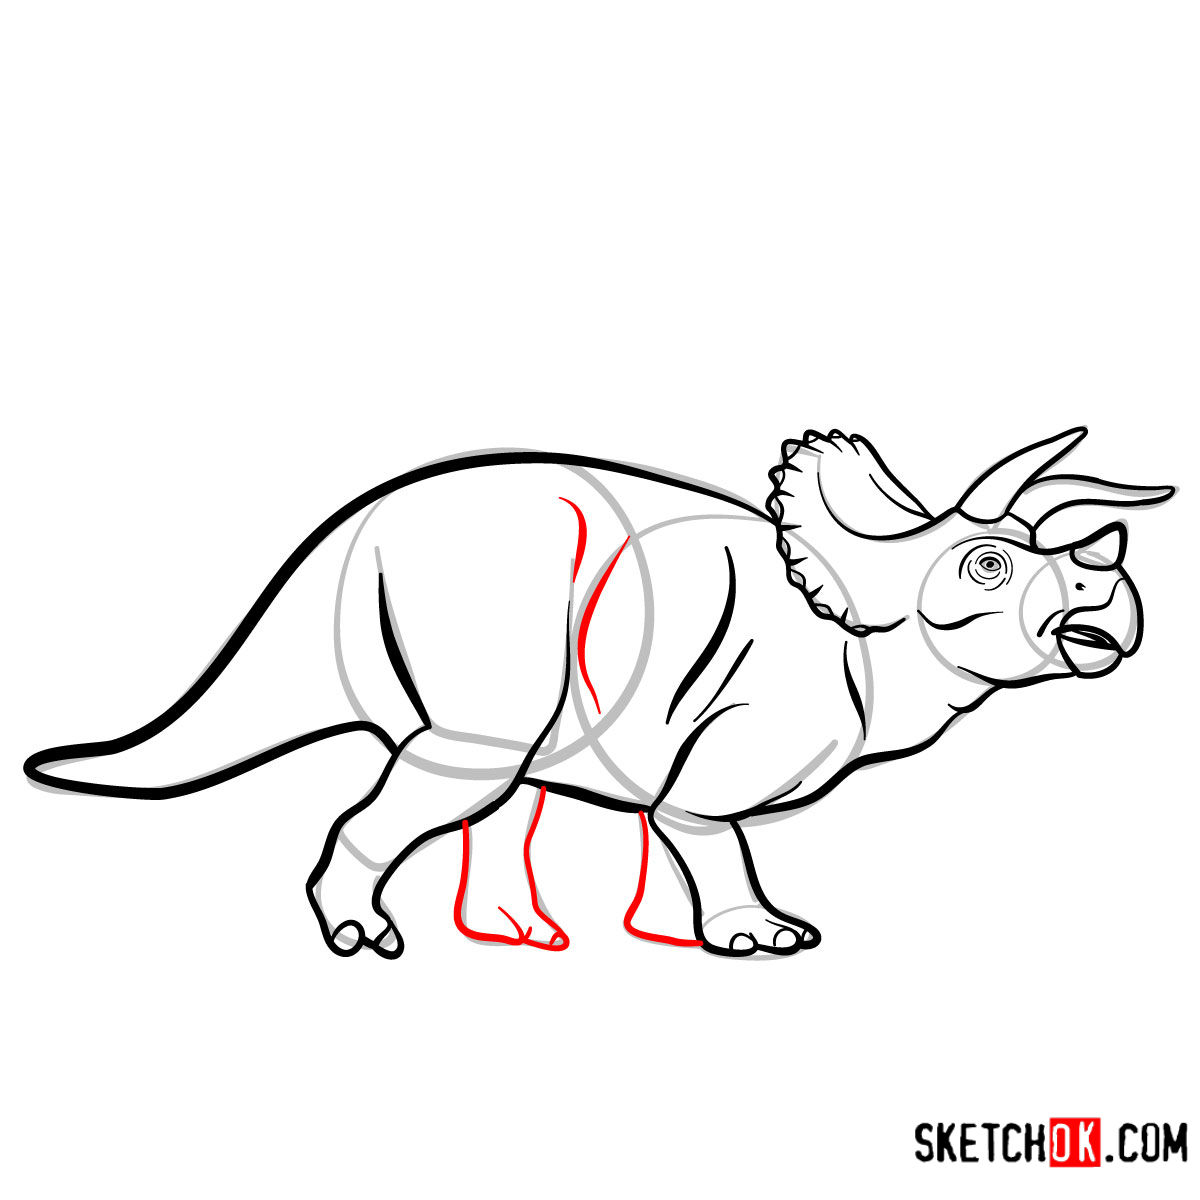 How to draw a Triceratops | Extinct Animals - step 10